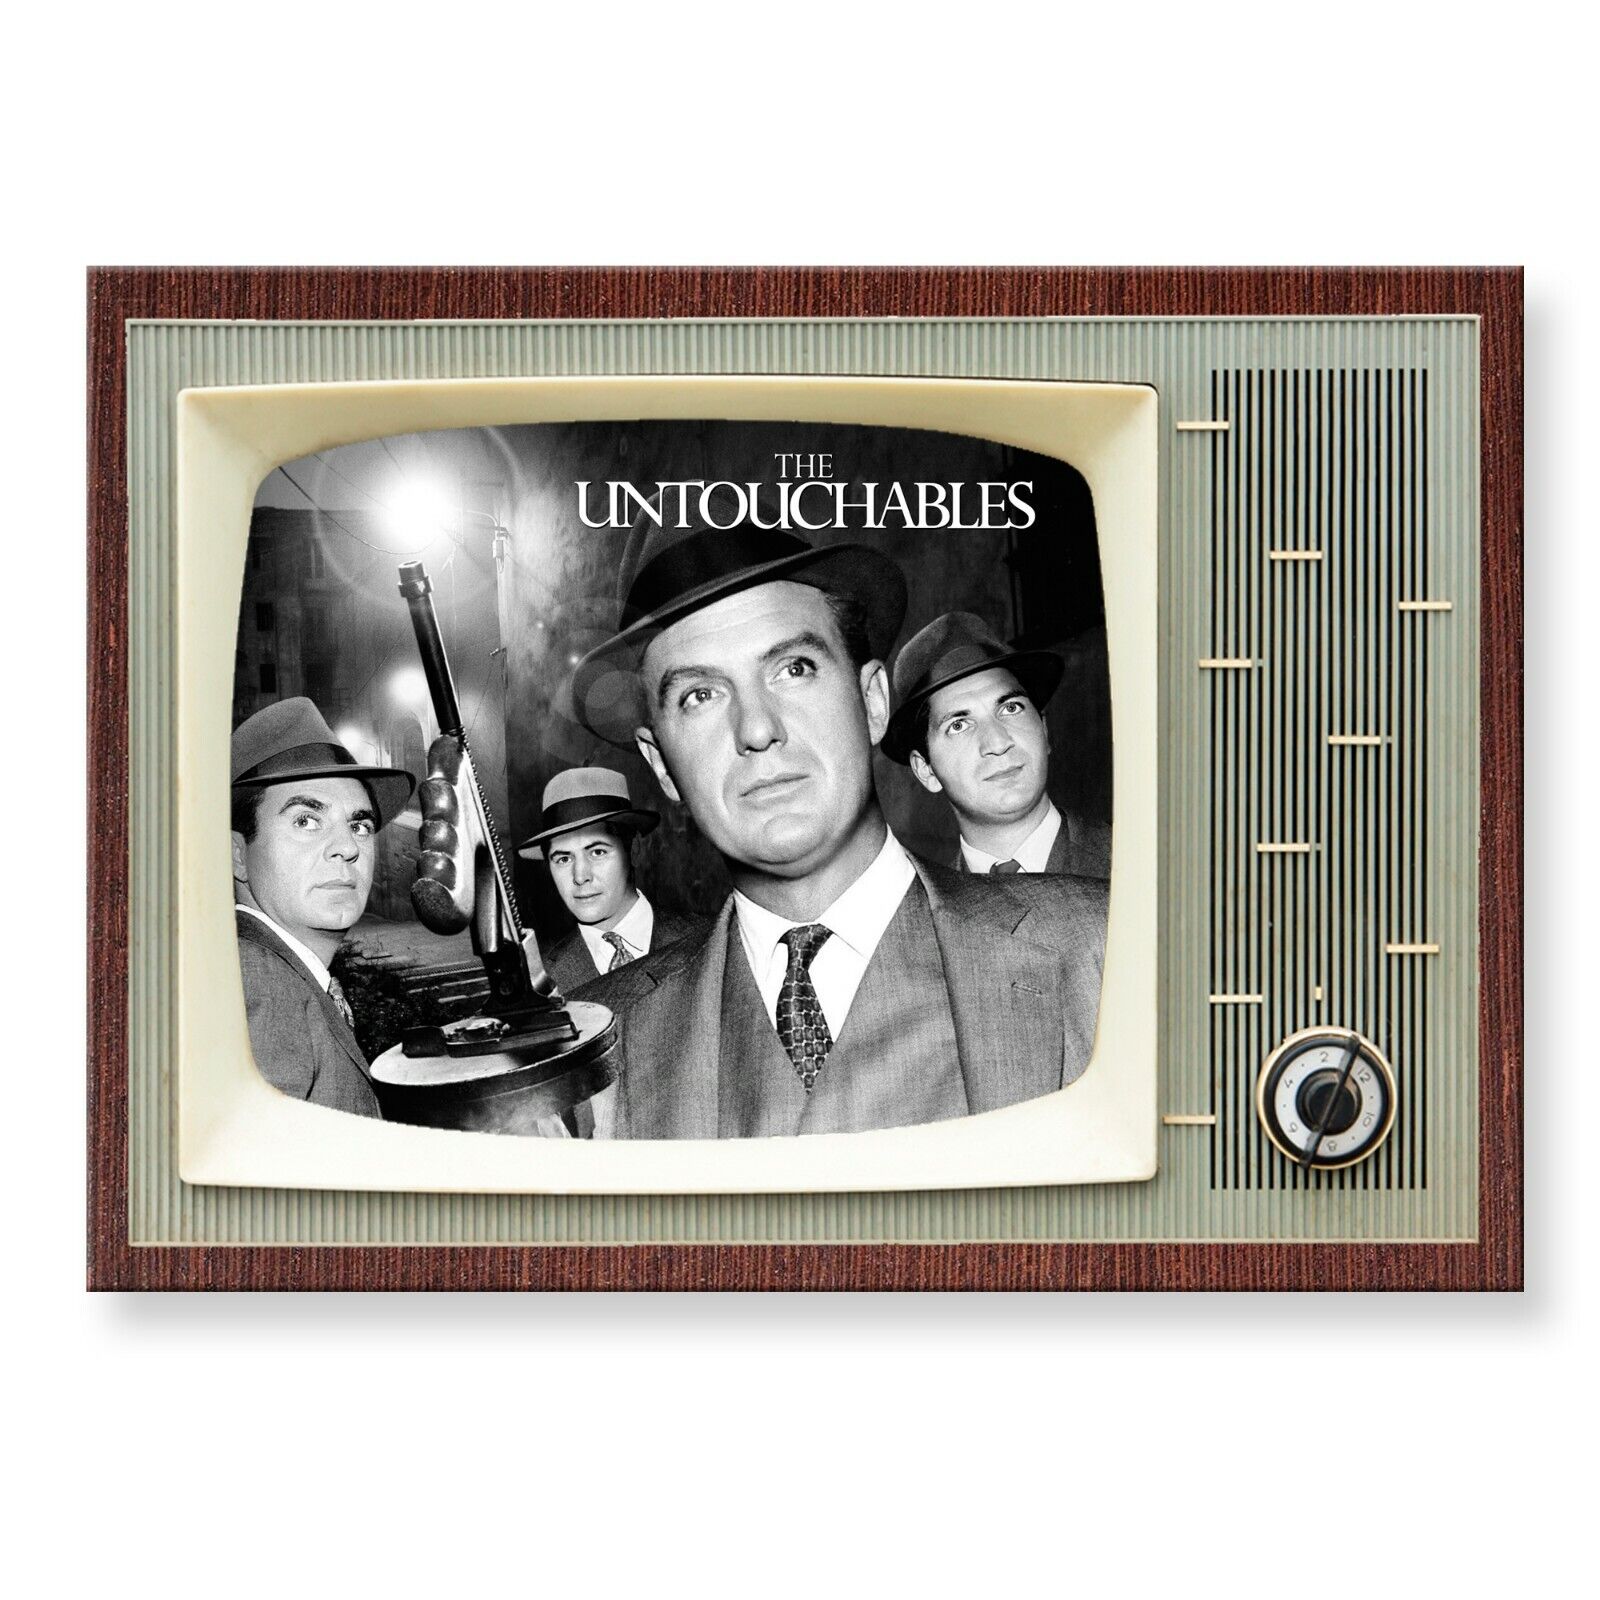 THE UNTOUCHABLES TV Show Classic TV 3.5 inches x 2.5 inches FRIDGE MAGNET